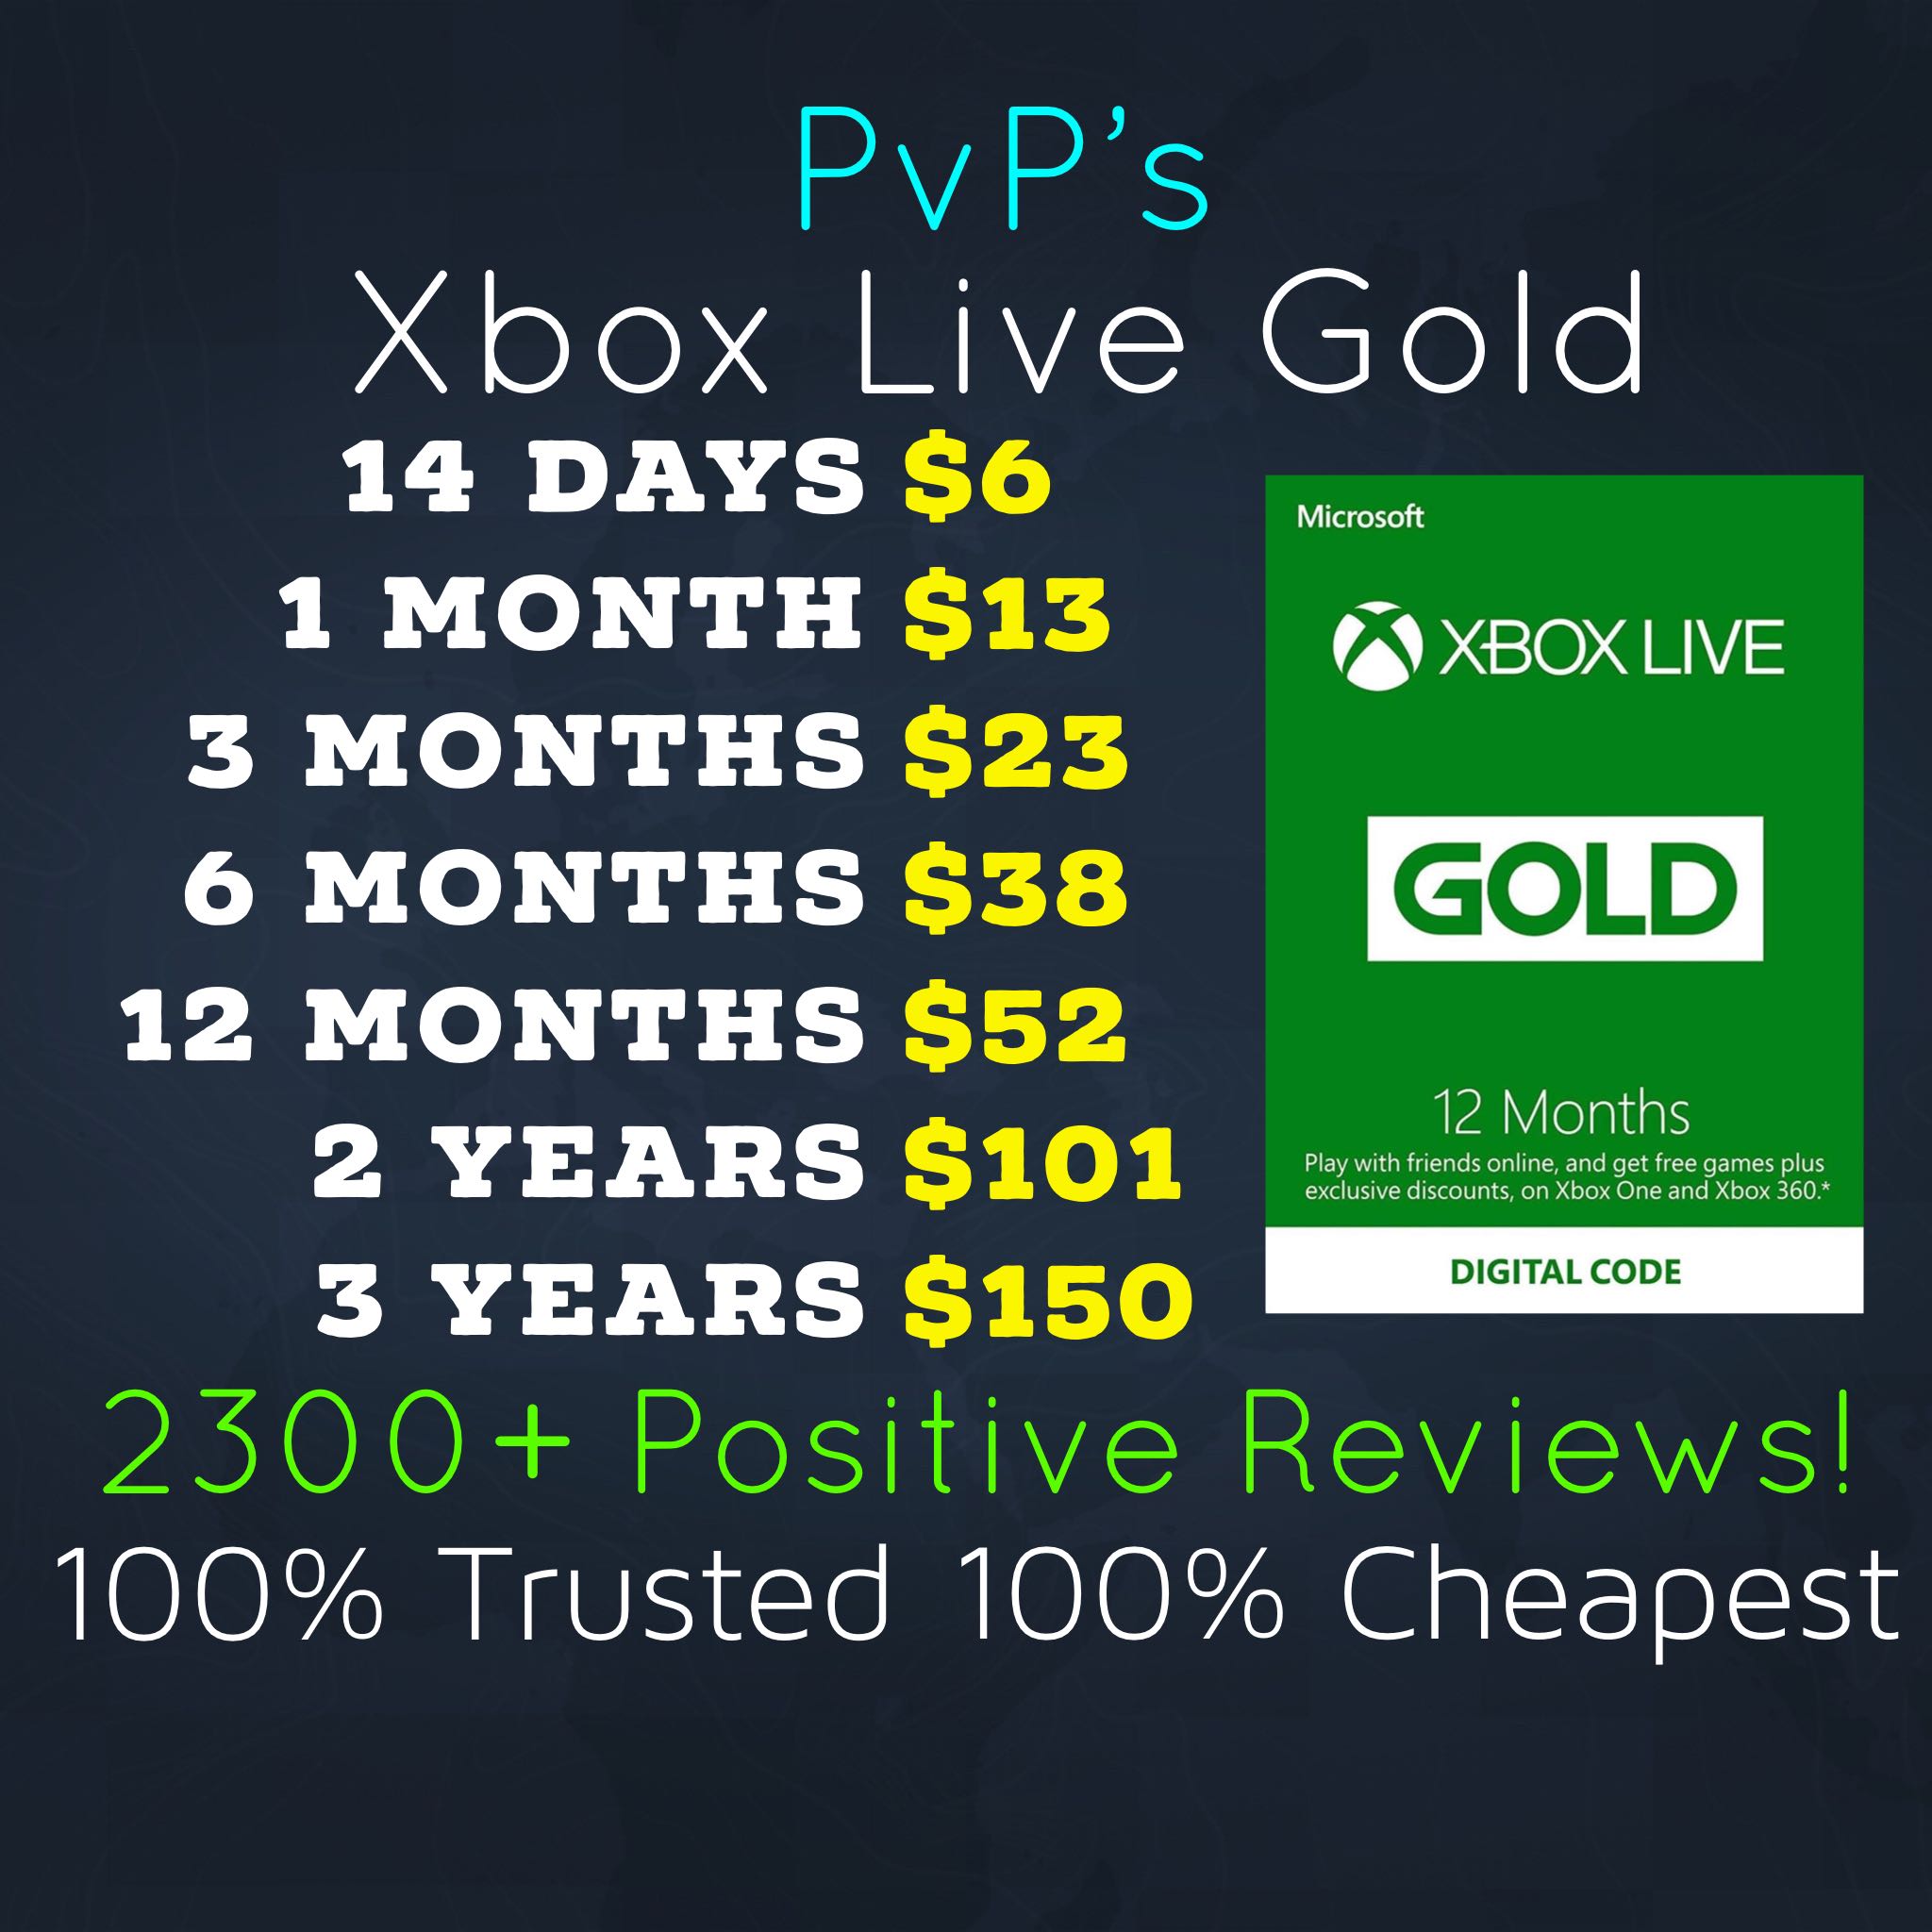 3 years of xbox live gold